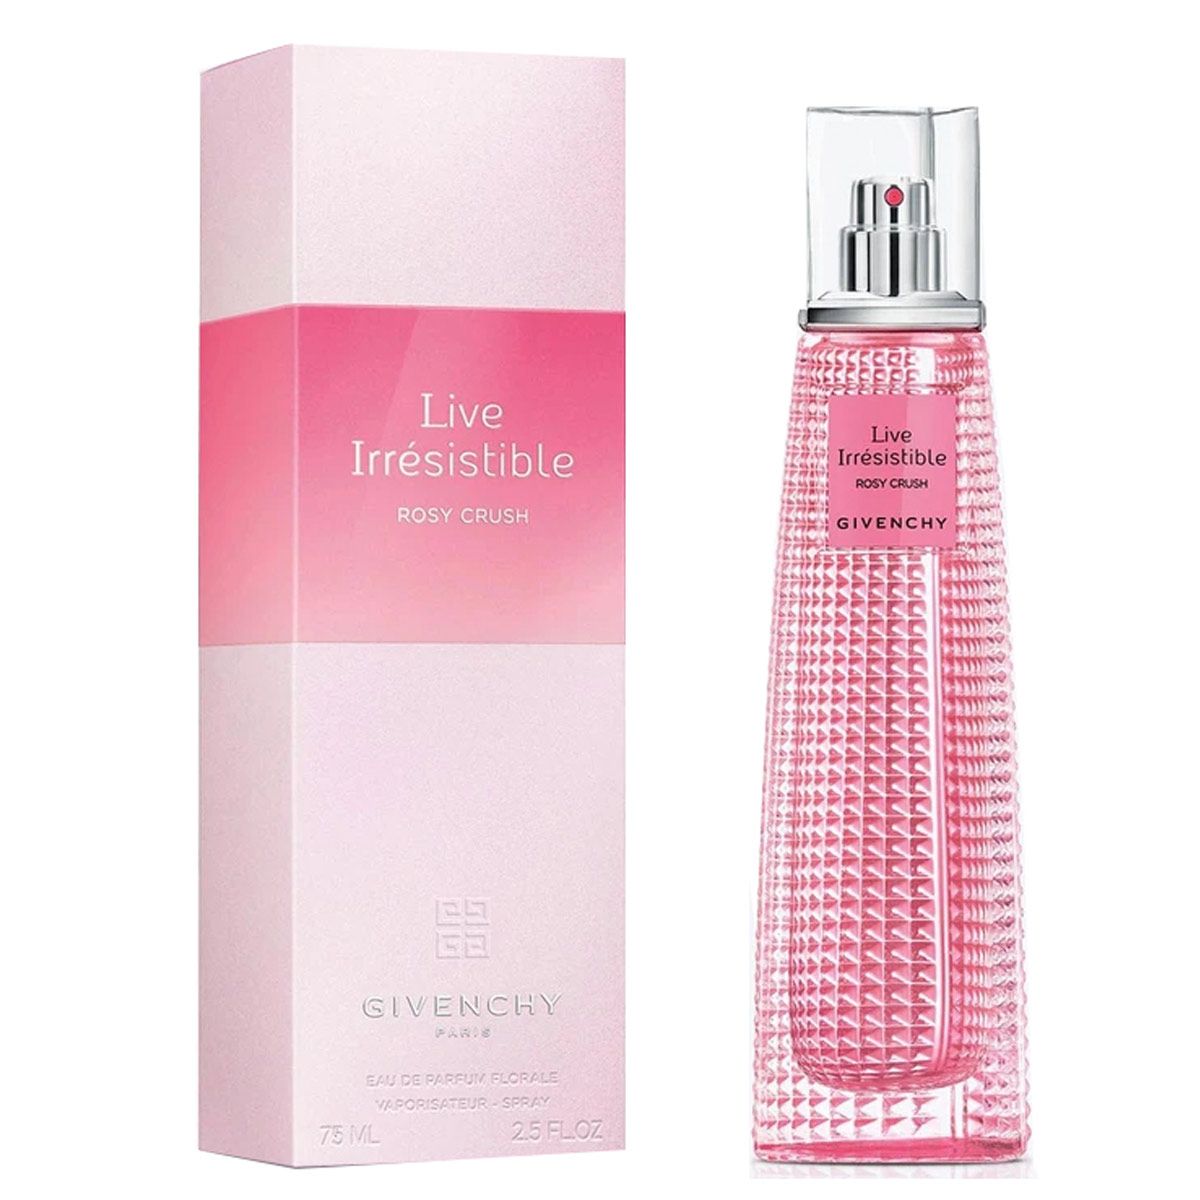  Givenchy Live Irresistible Rosy Crush 